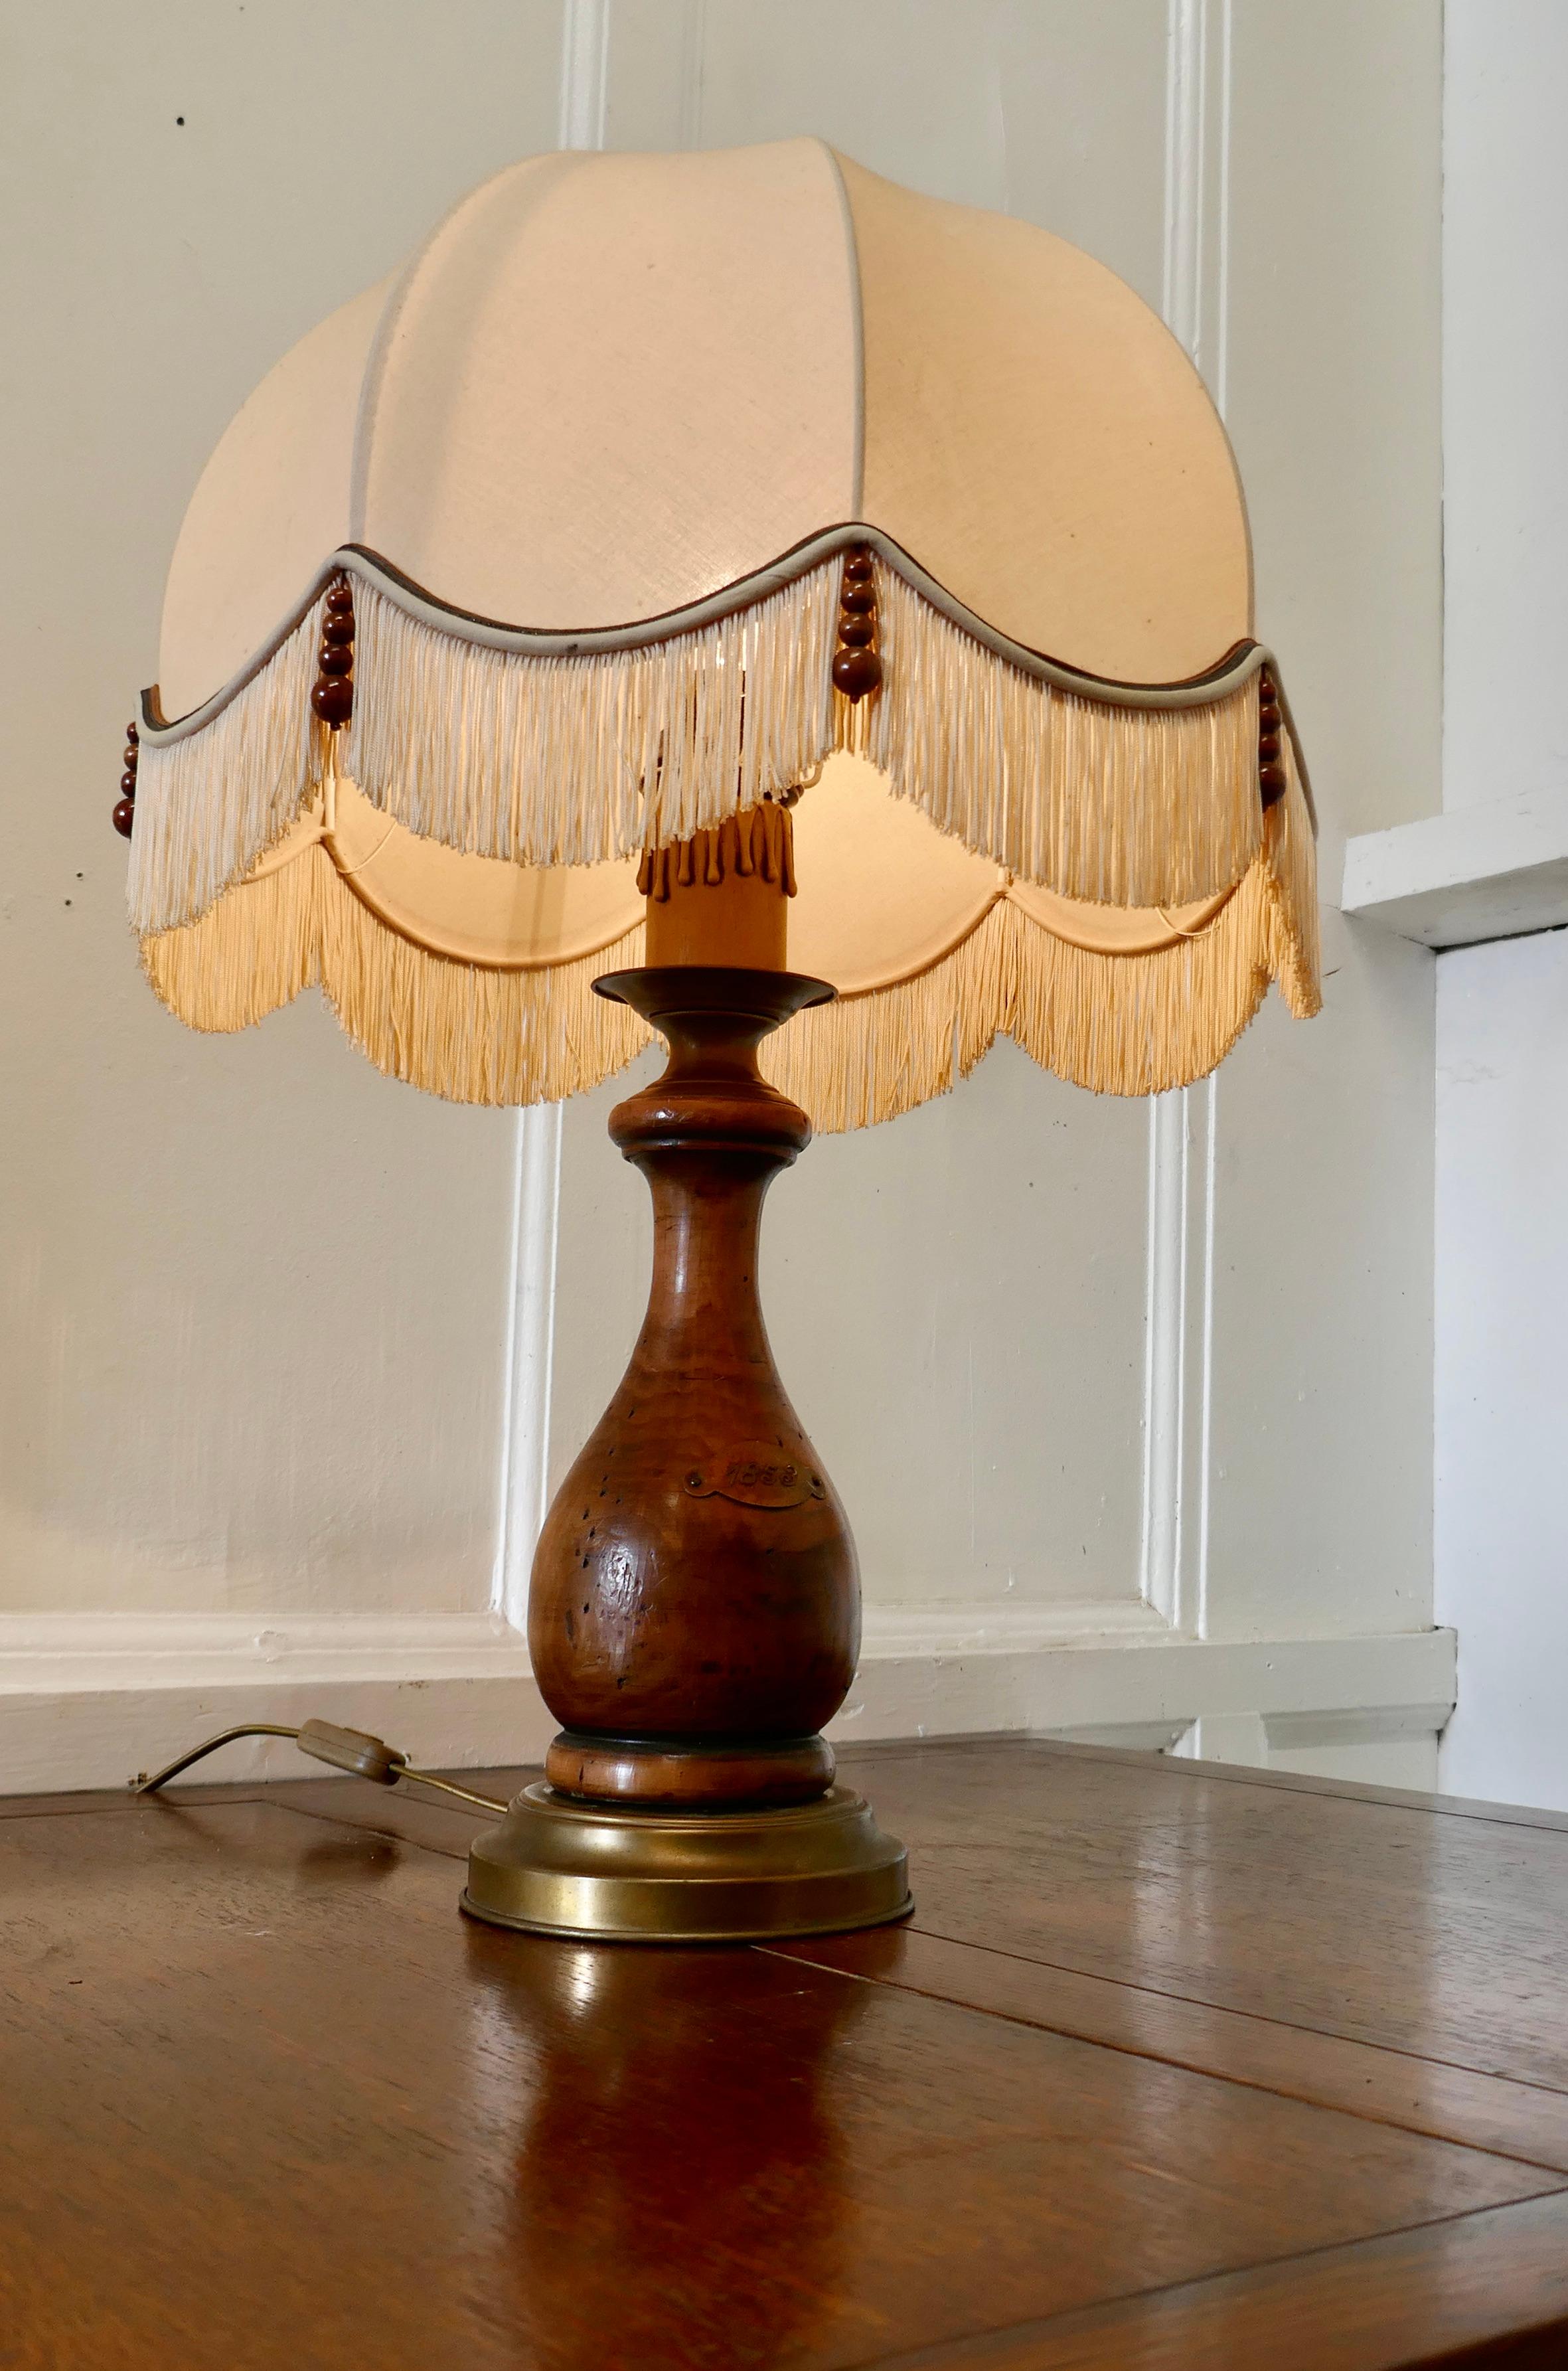 Bulbous wood French table lamp with dome lampshade

The lamp has a large turned wood base which is topped off with a superb large dome lampshade in linen decorated with beads, it has a brass plaque stamped 1853
The lamp and shade are in good used